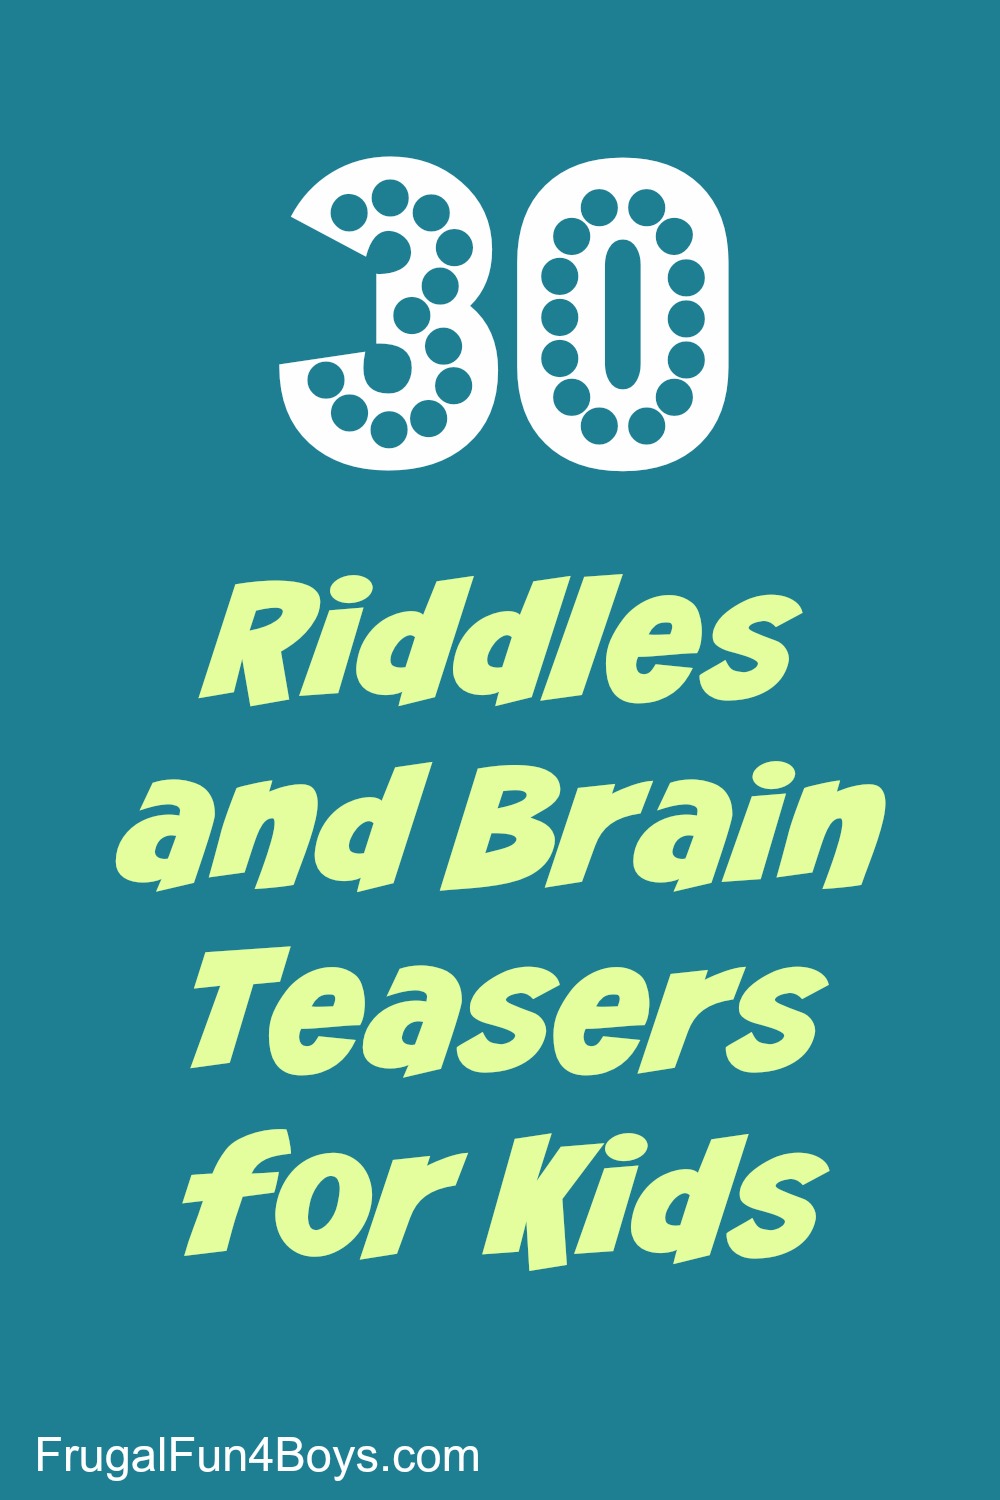 30 Riddles and Brain Teasers for Kids